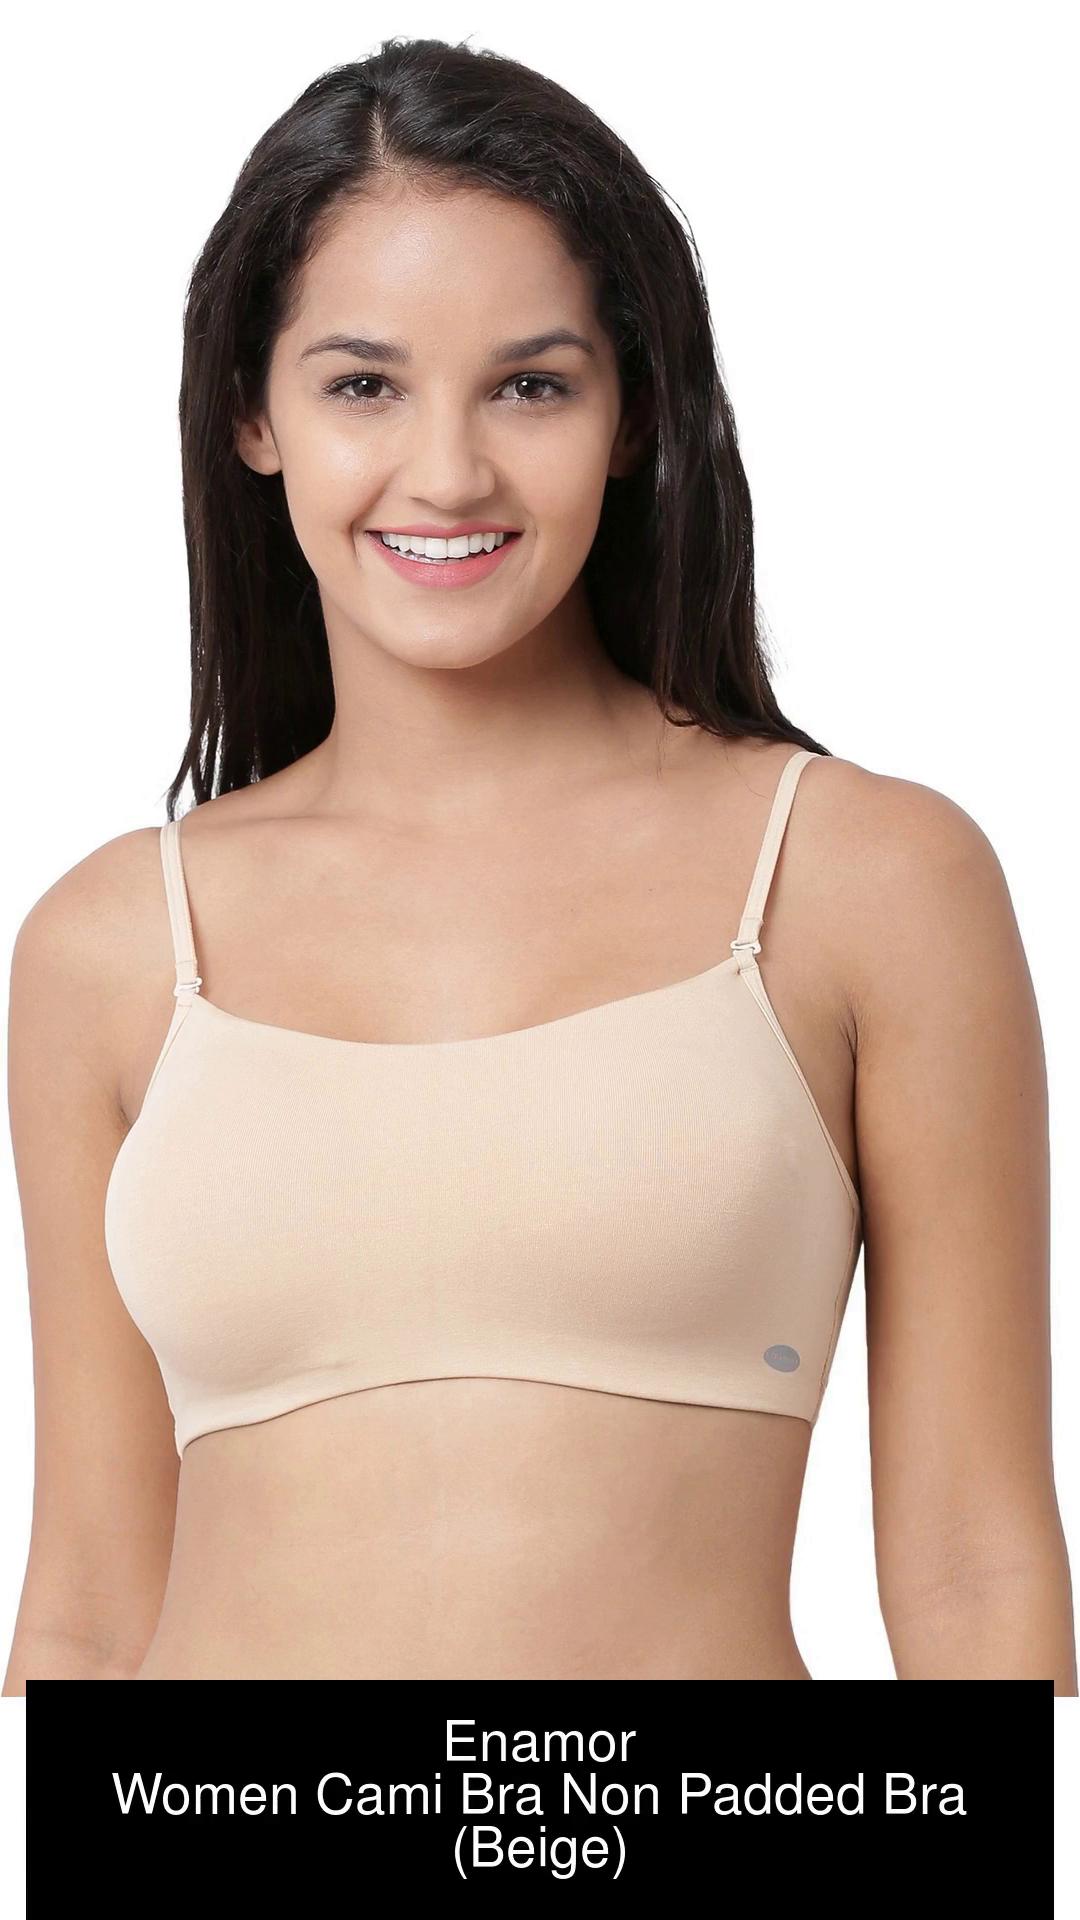 Enamor Full Coverage, Wirefree A022 Comfort Cami Cotton Women Cami